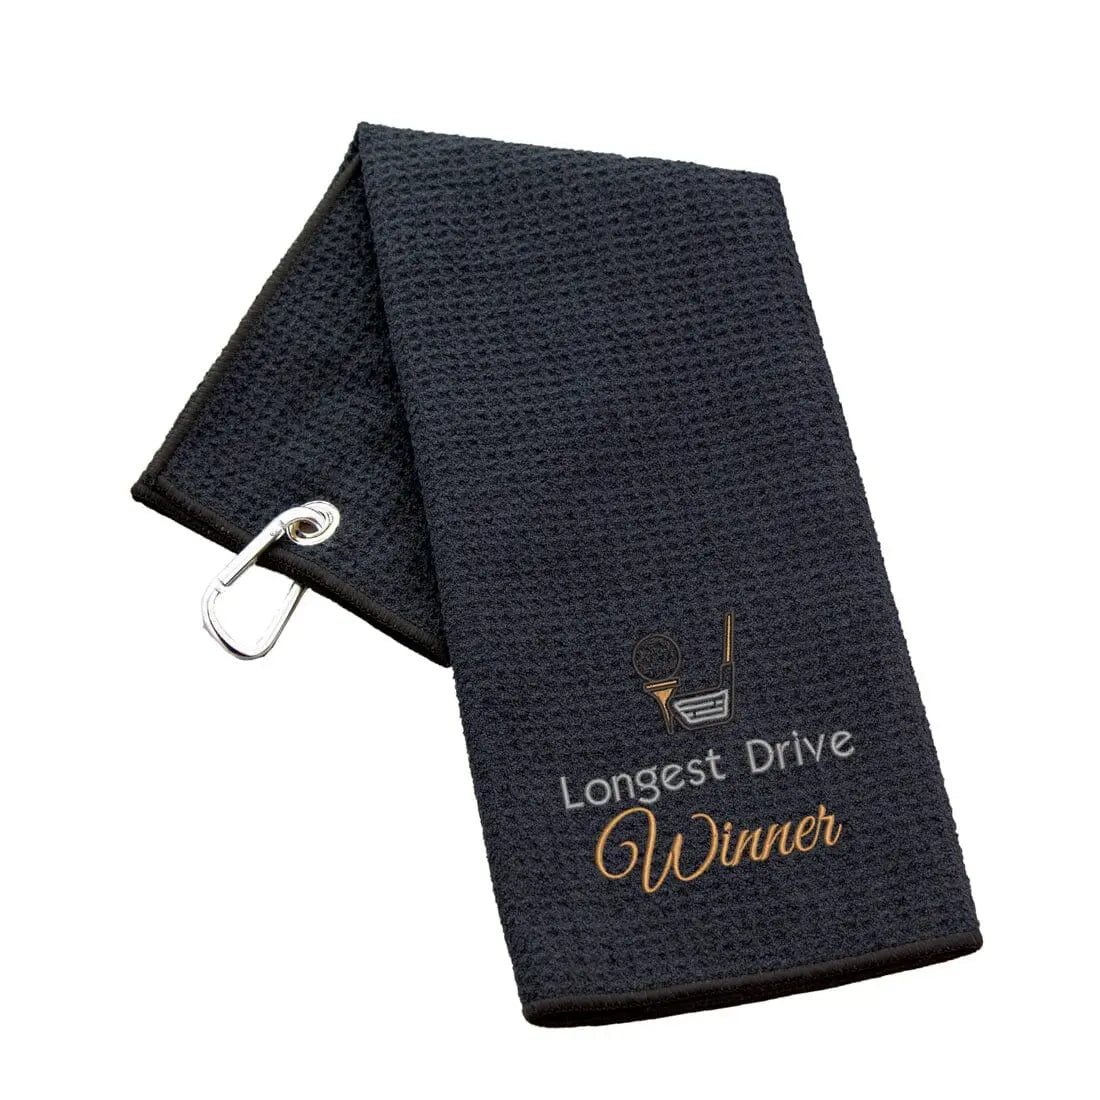 Tri-Fold Golf Towel Embroidered For Longest Drive Competition Waffle Black  